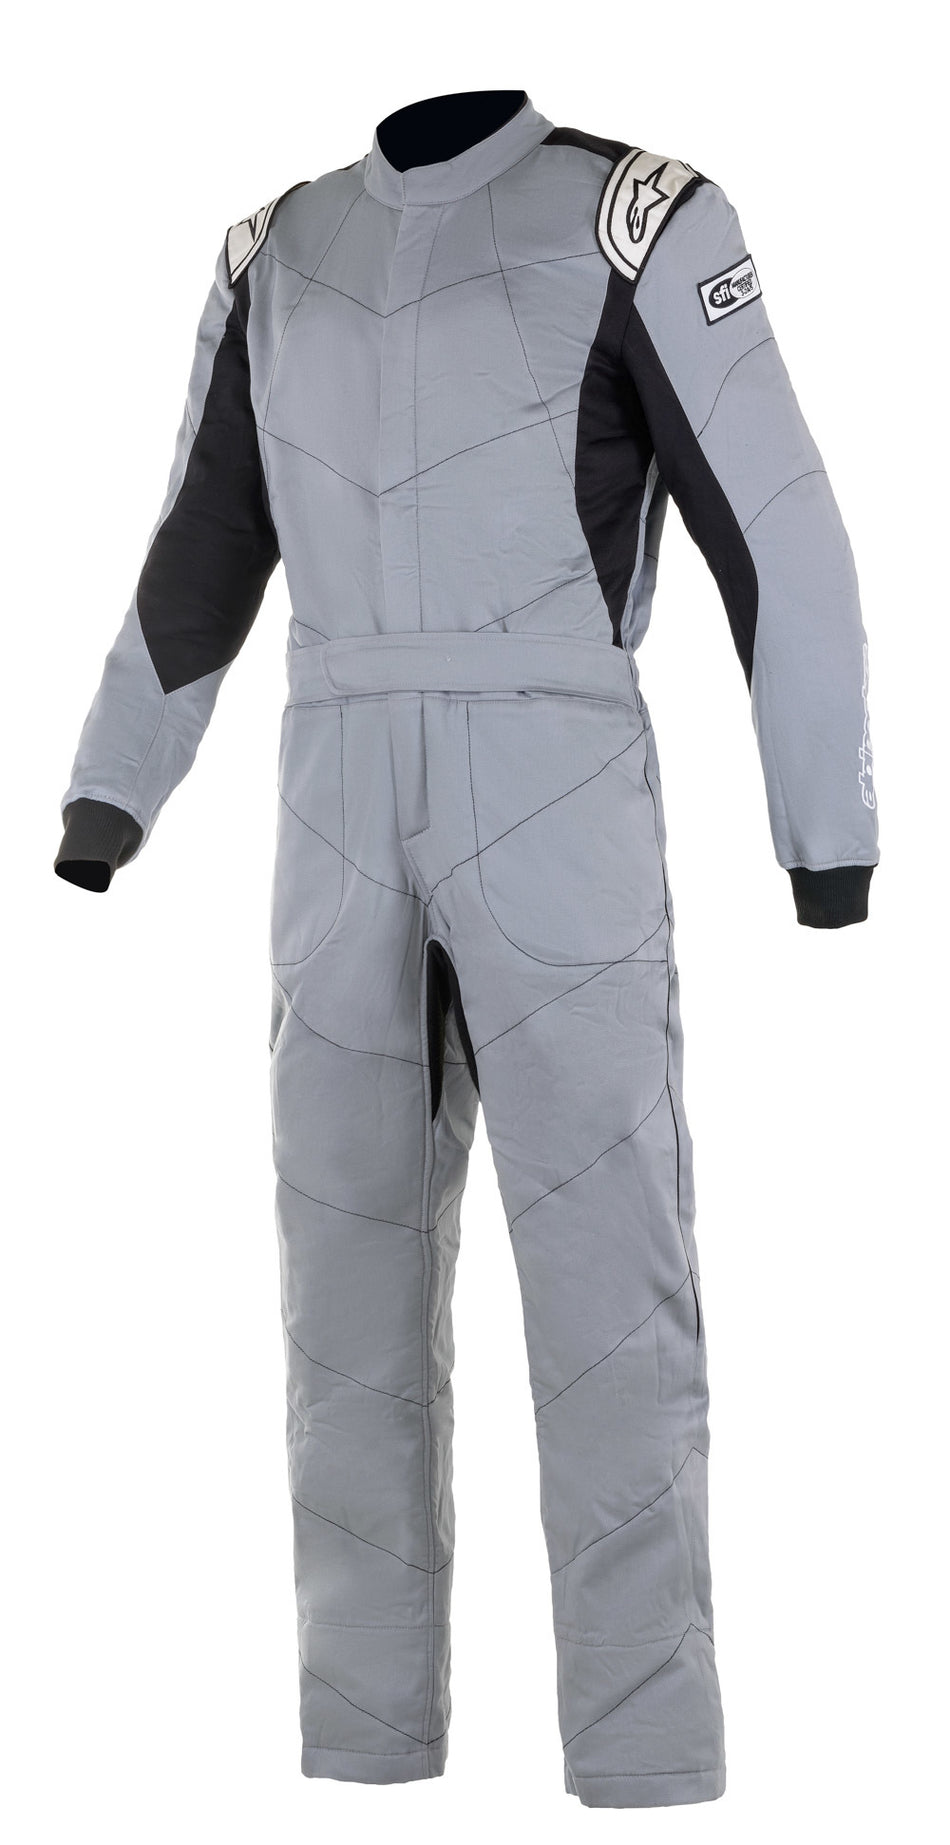 Driving Suit - Knoxville V2 - 1-Piece - SFI 3.2A/5 - Boot-Cut - Triple Layer - Fire Retardant Fabric - Gray / Black - Size 52 - Medium - Each